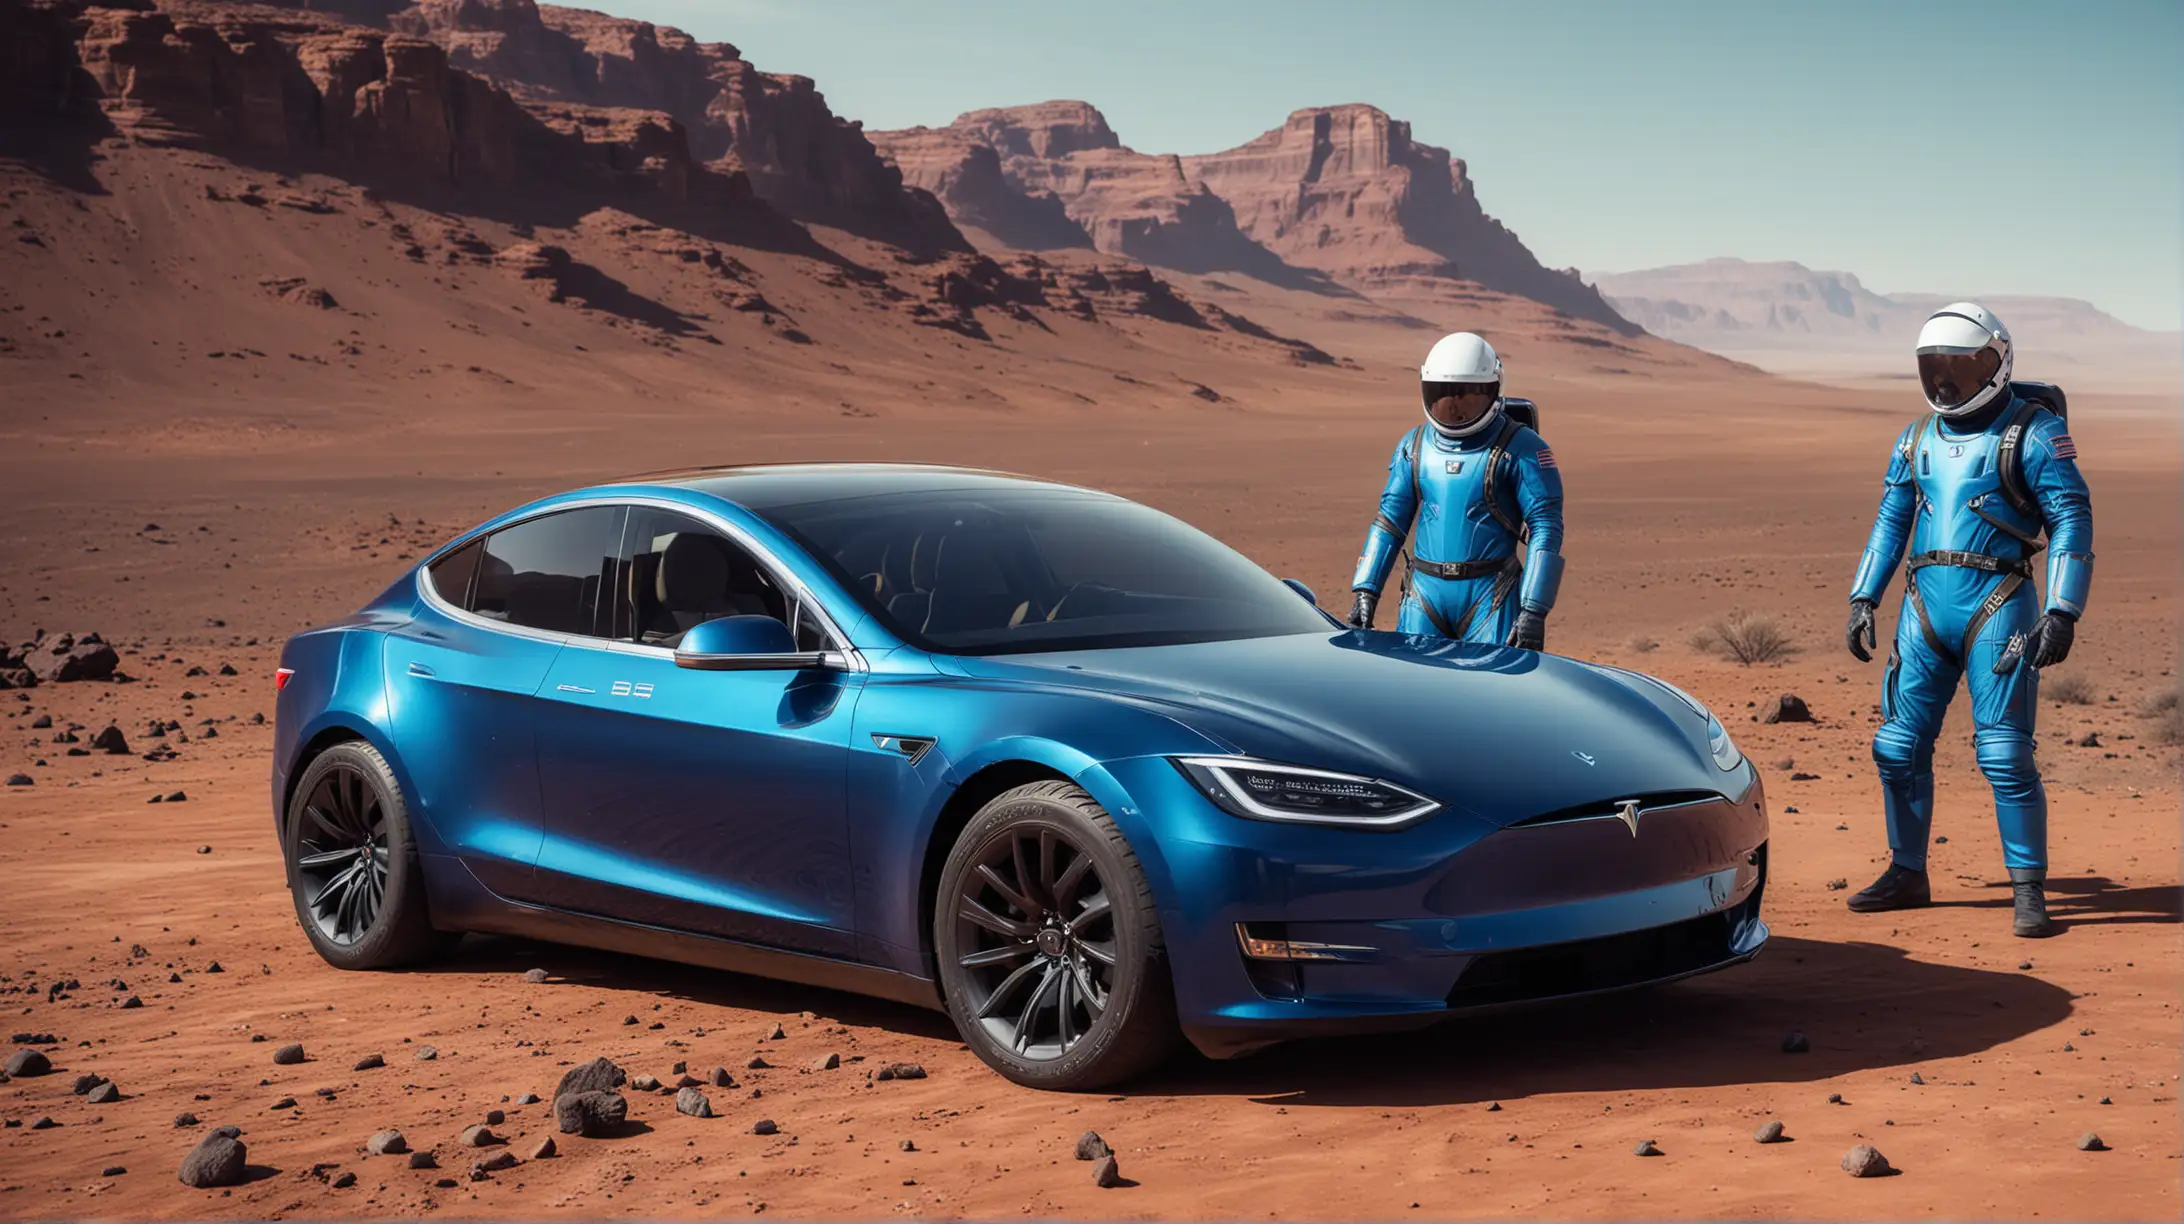 on the planet mars a blue tesla 3 and two astronauts 
